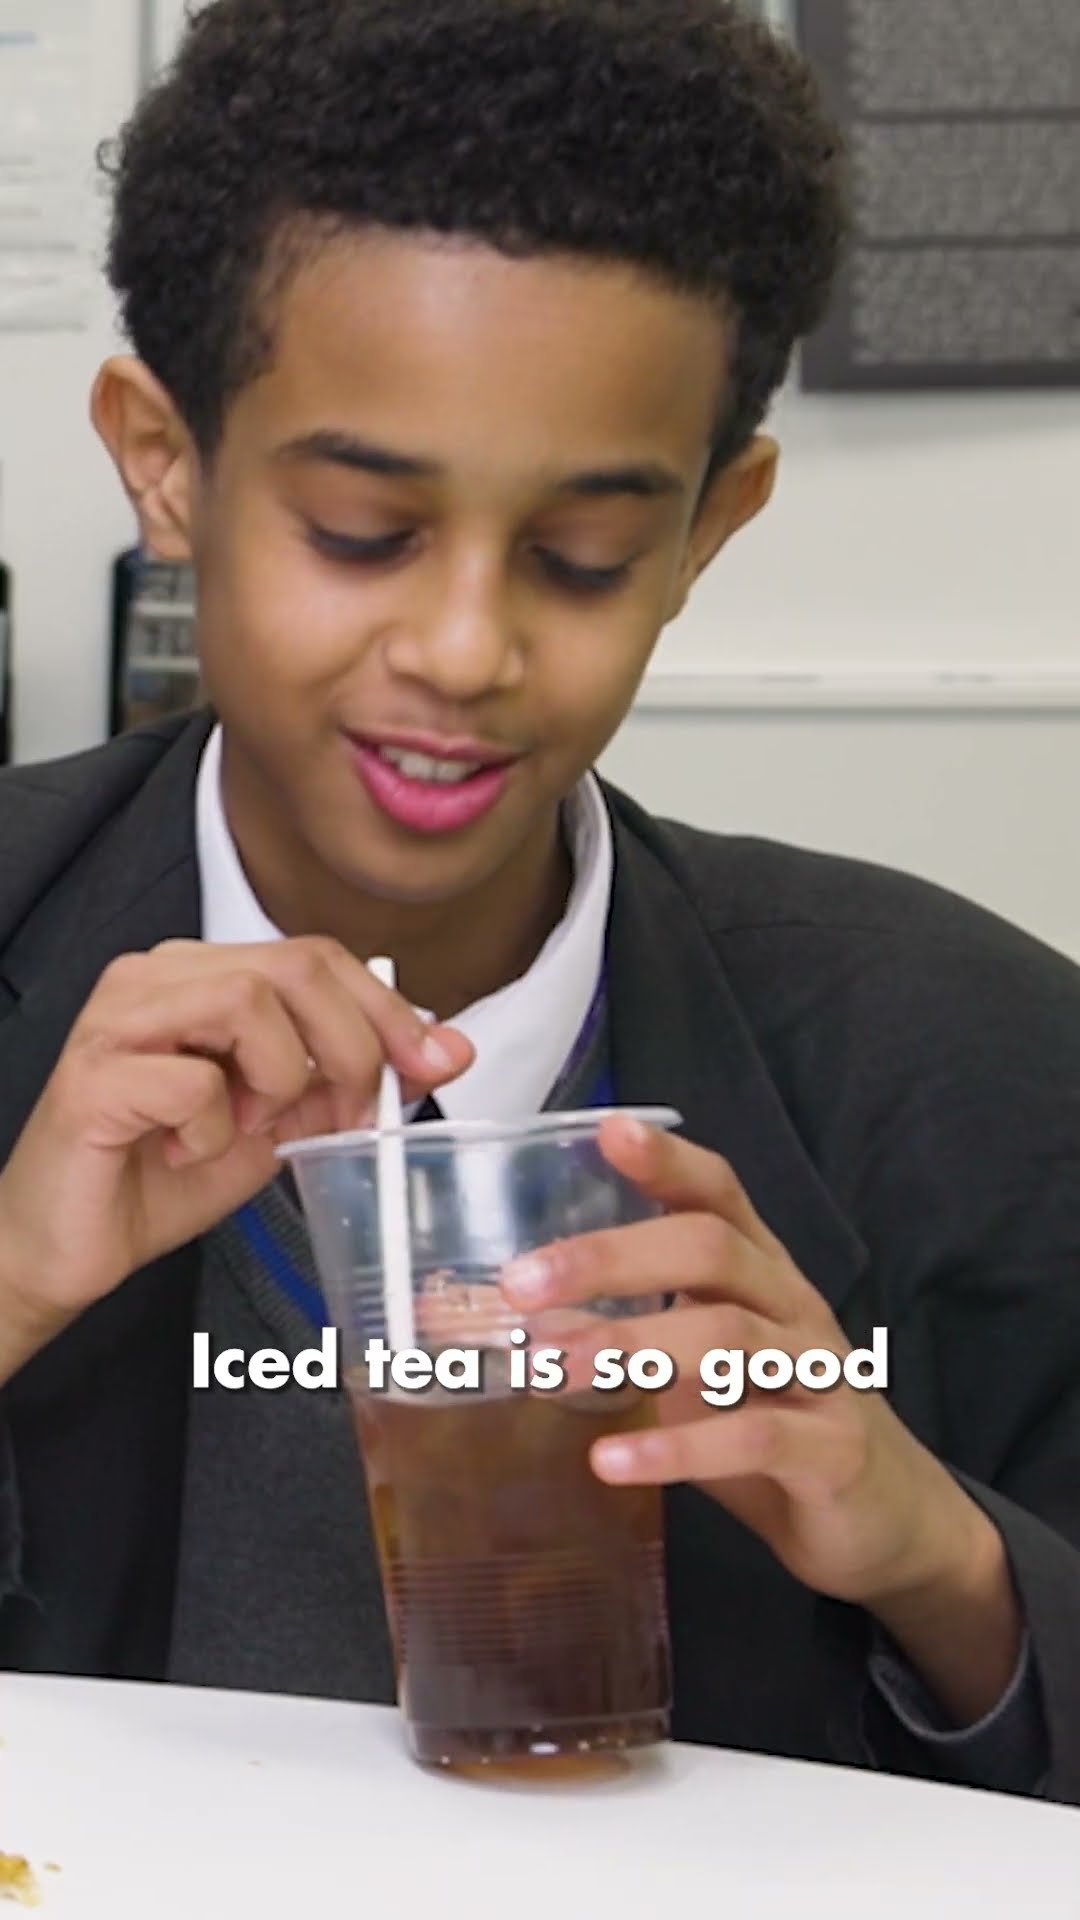 British high school students taste iced tea for the first time